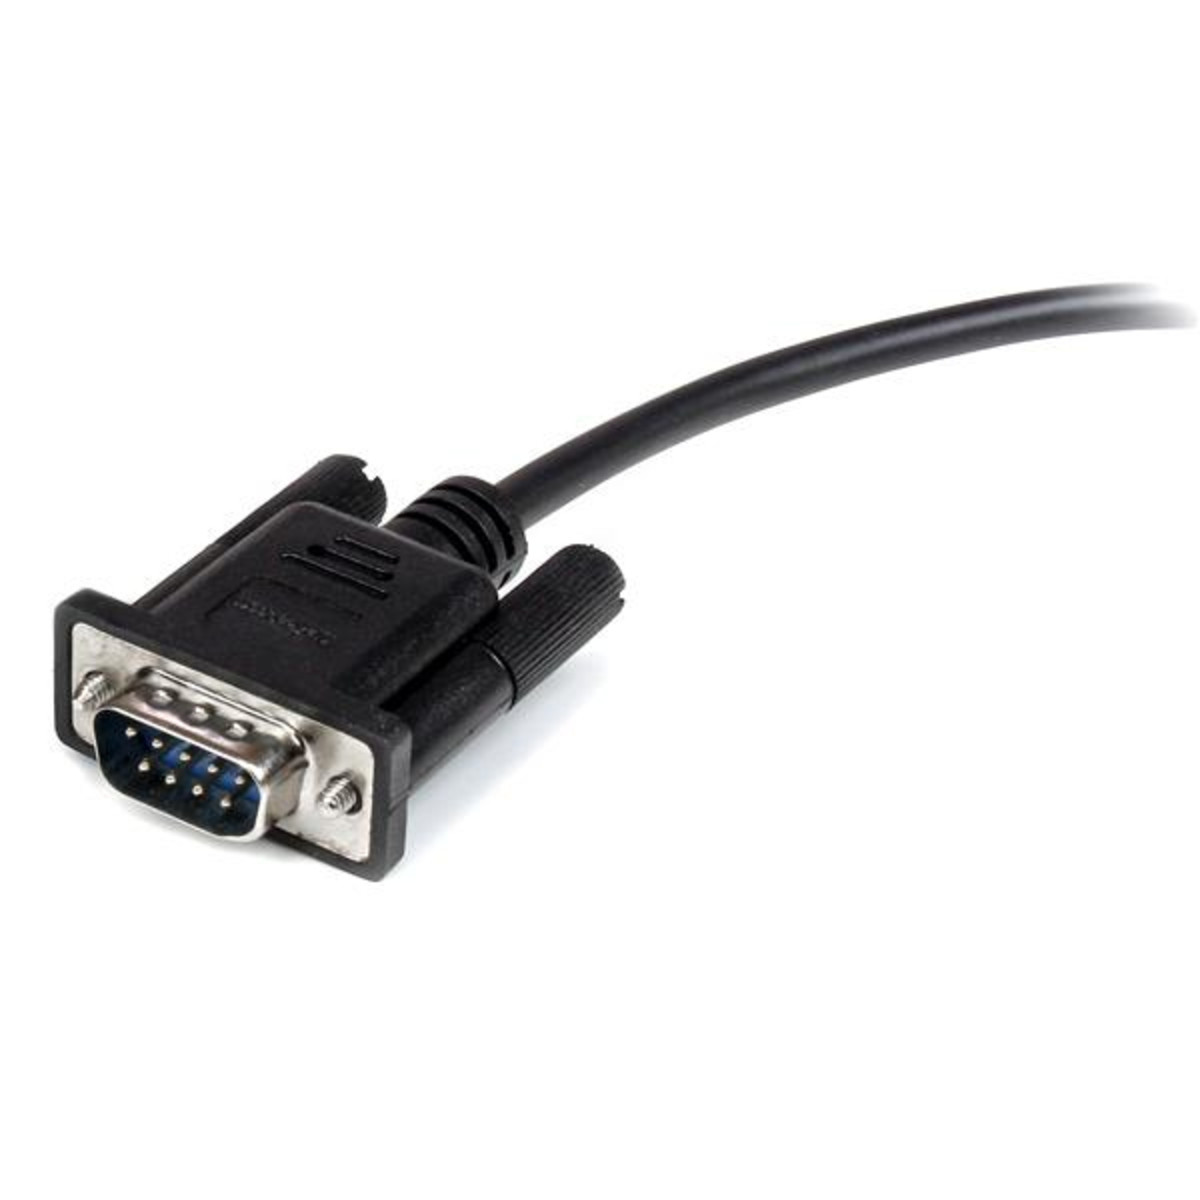 2m S-Through DB9 RS232 Serial Cable